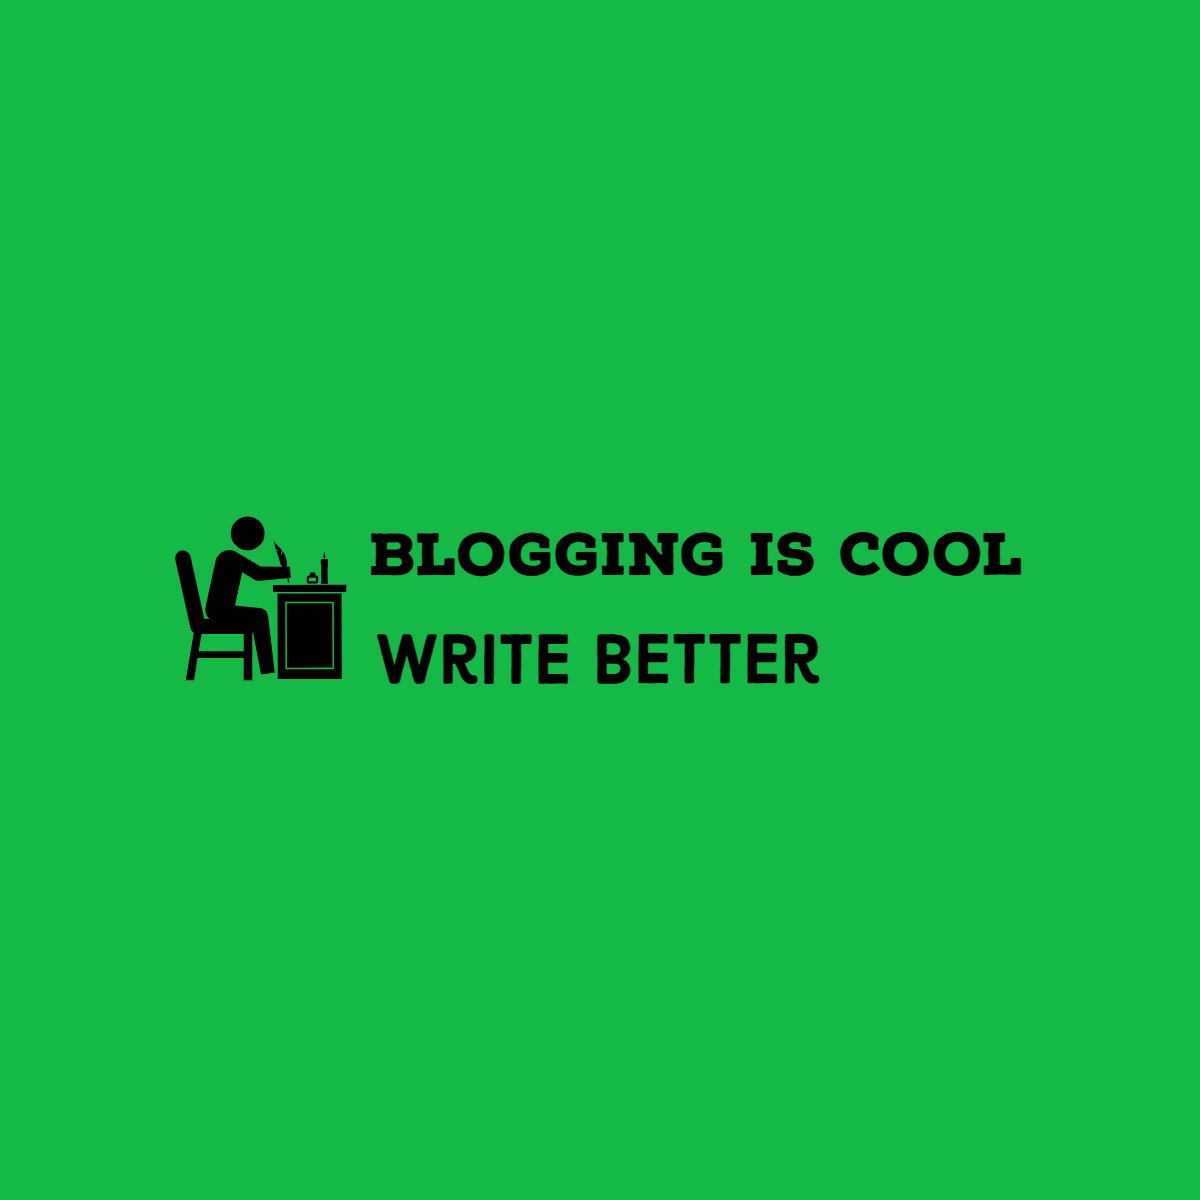 bloggingiscool.com is about making bloggers better by teaching them